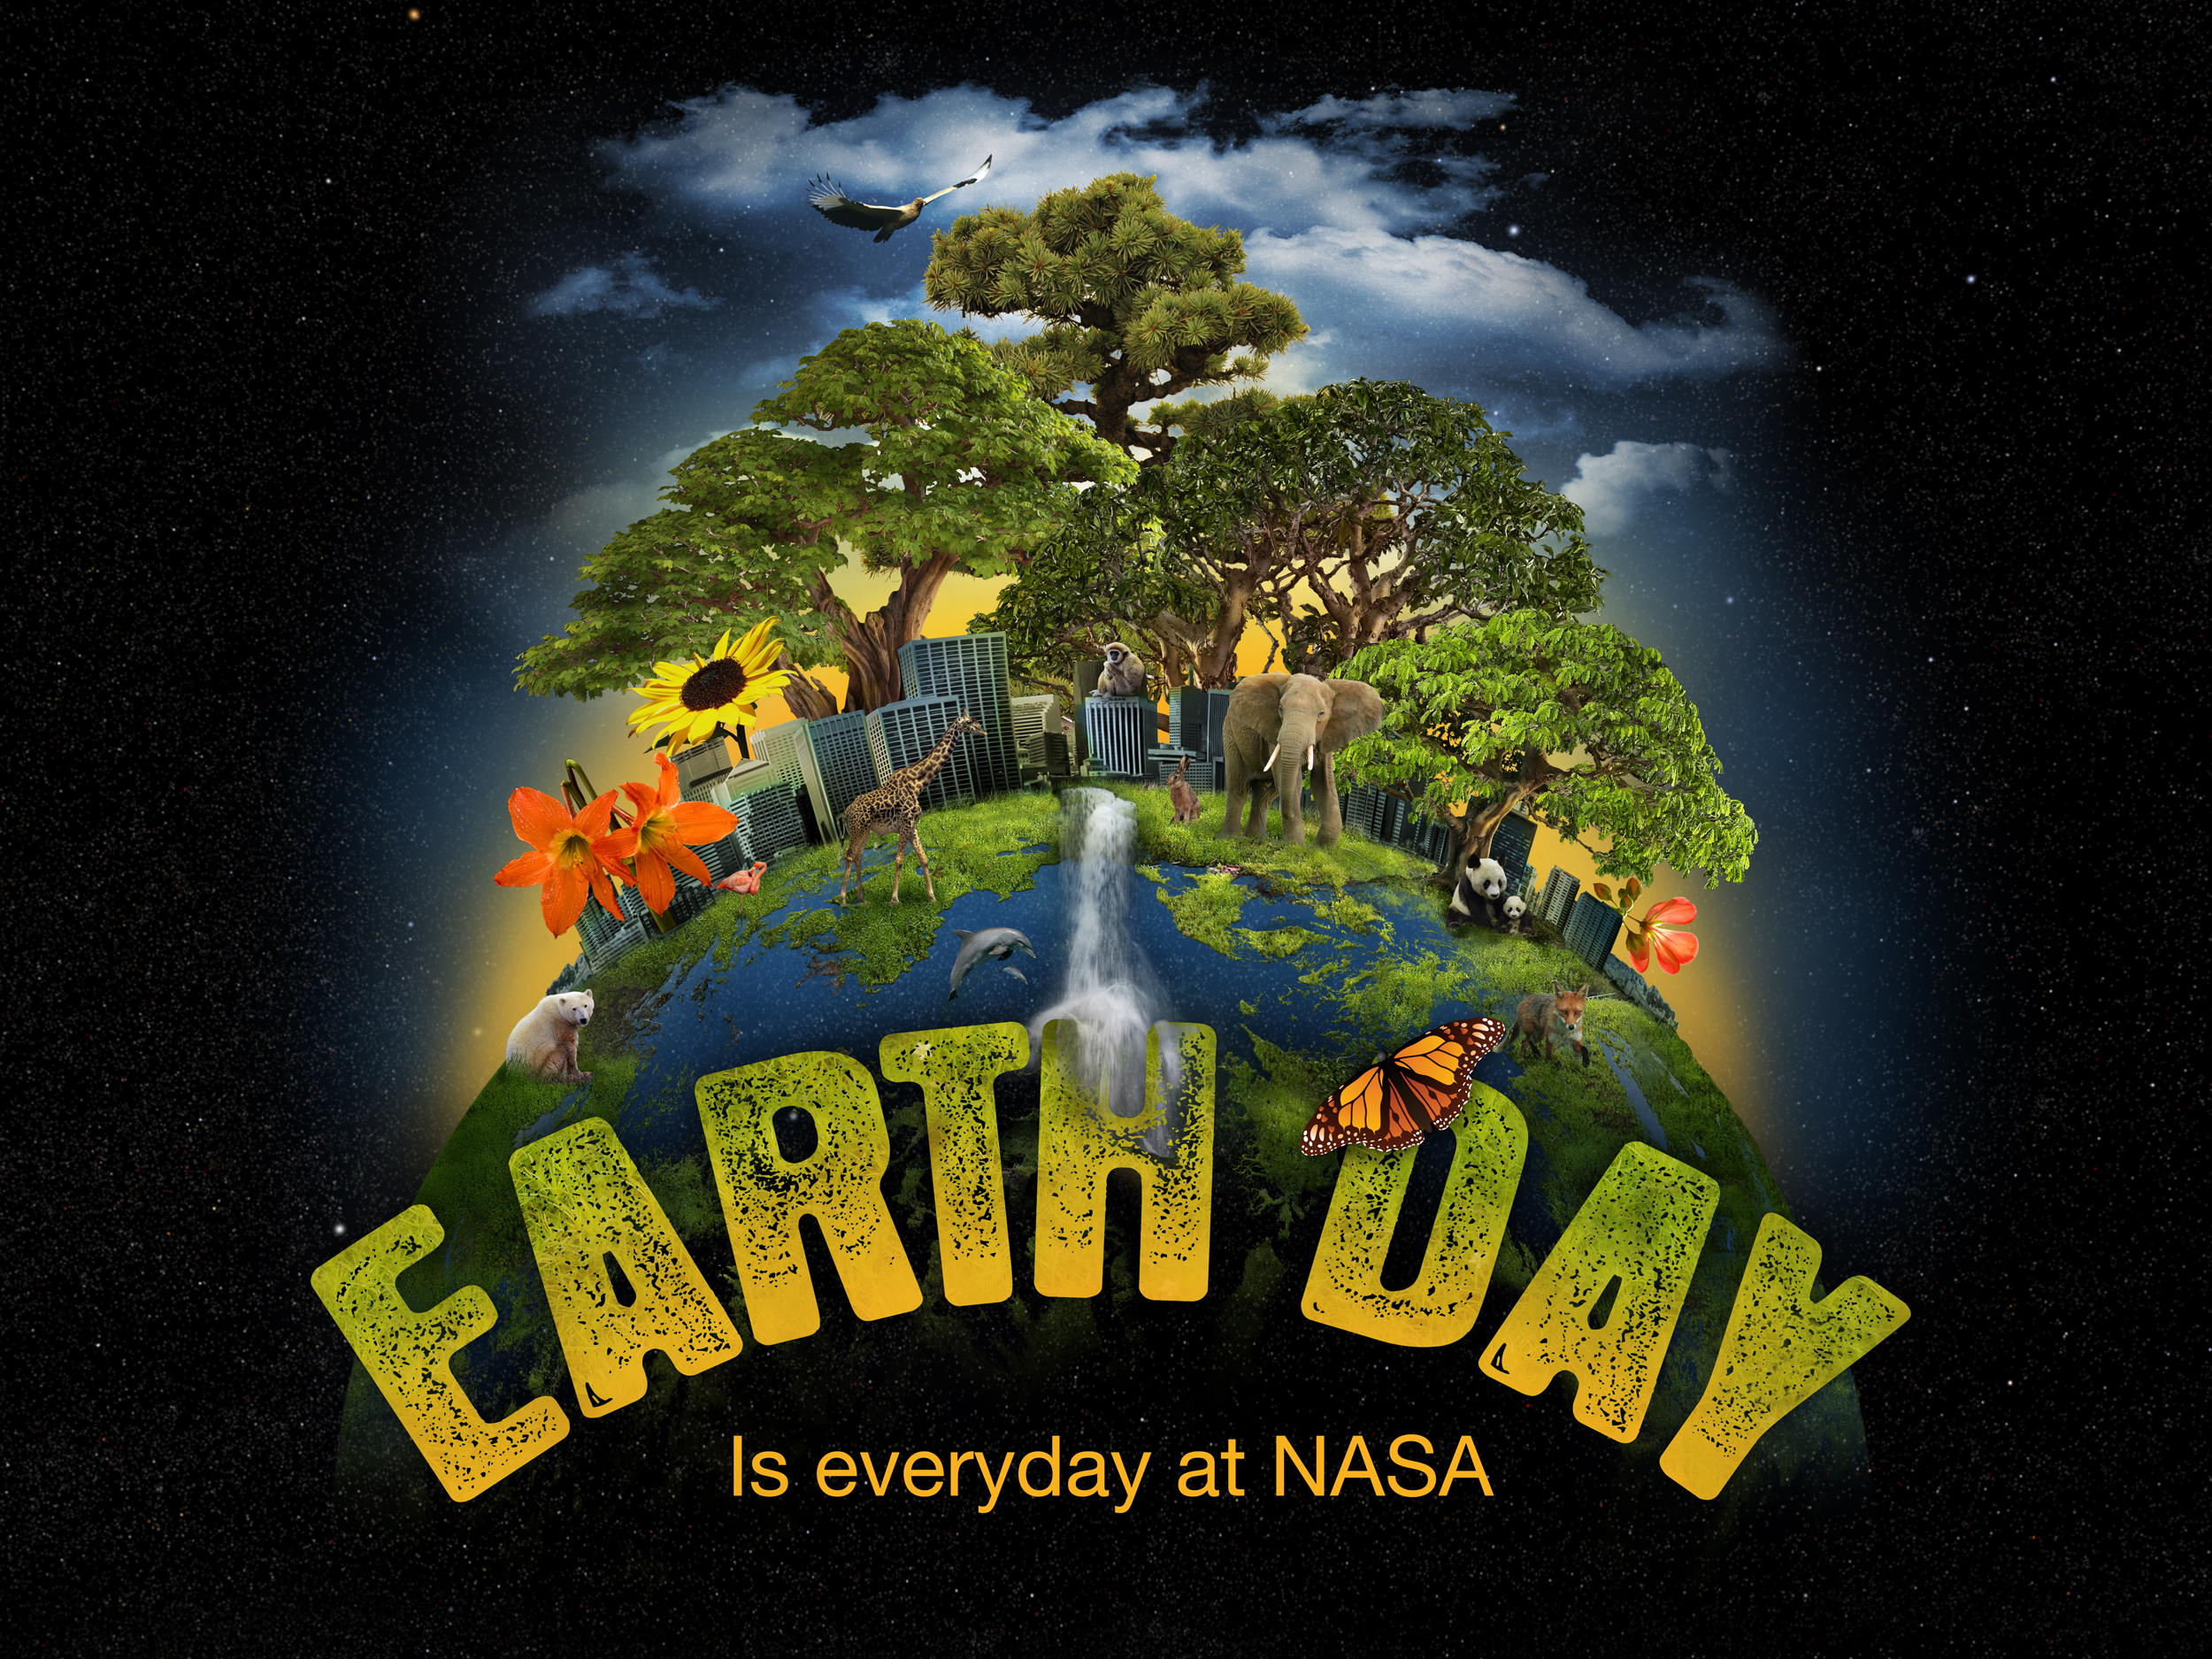 earth day poster assignment